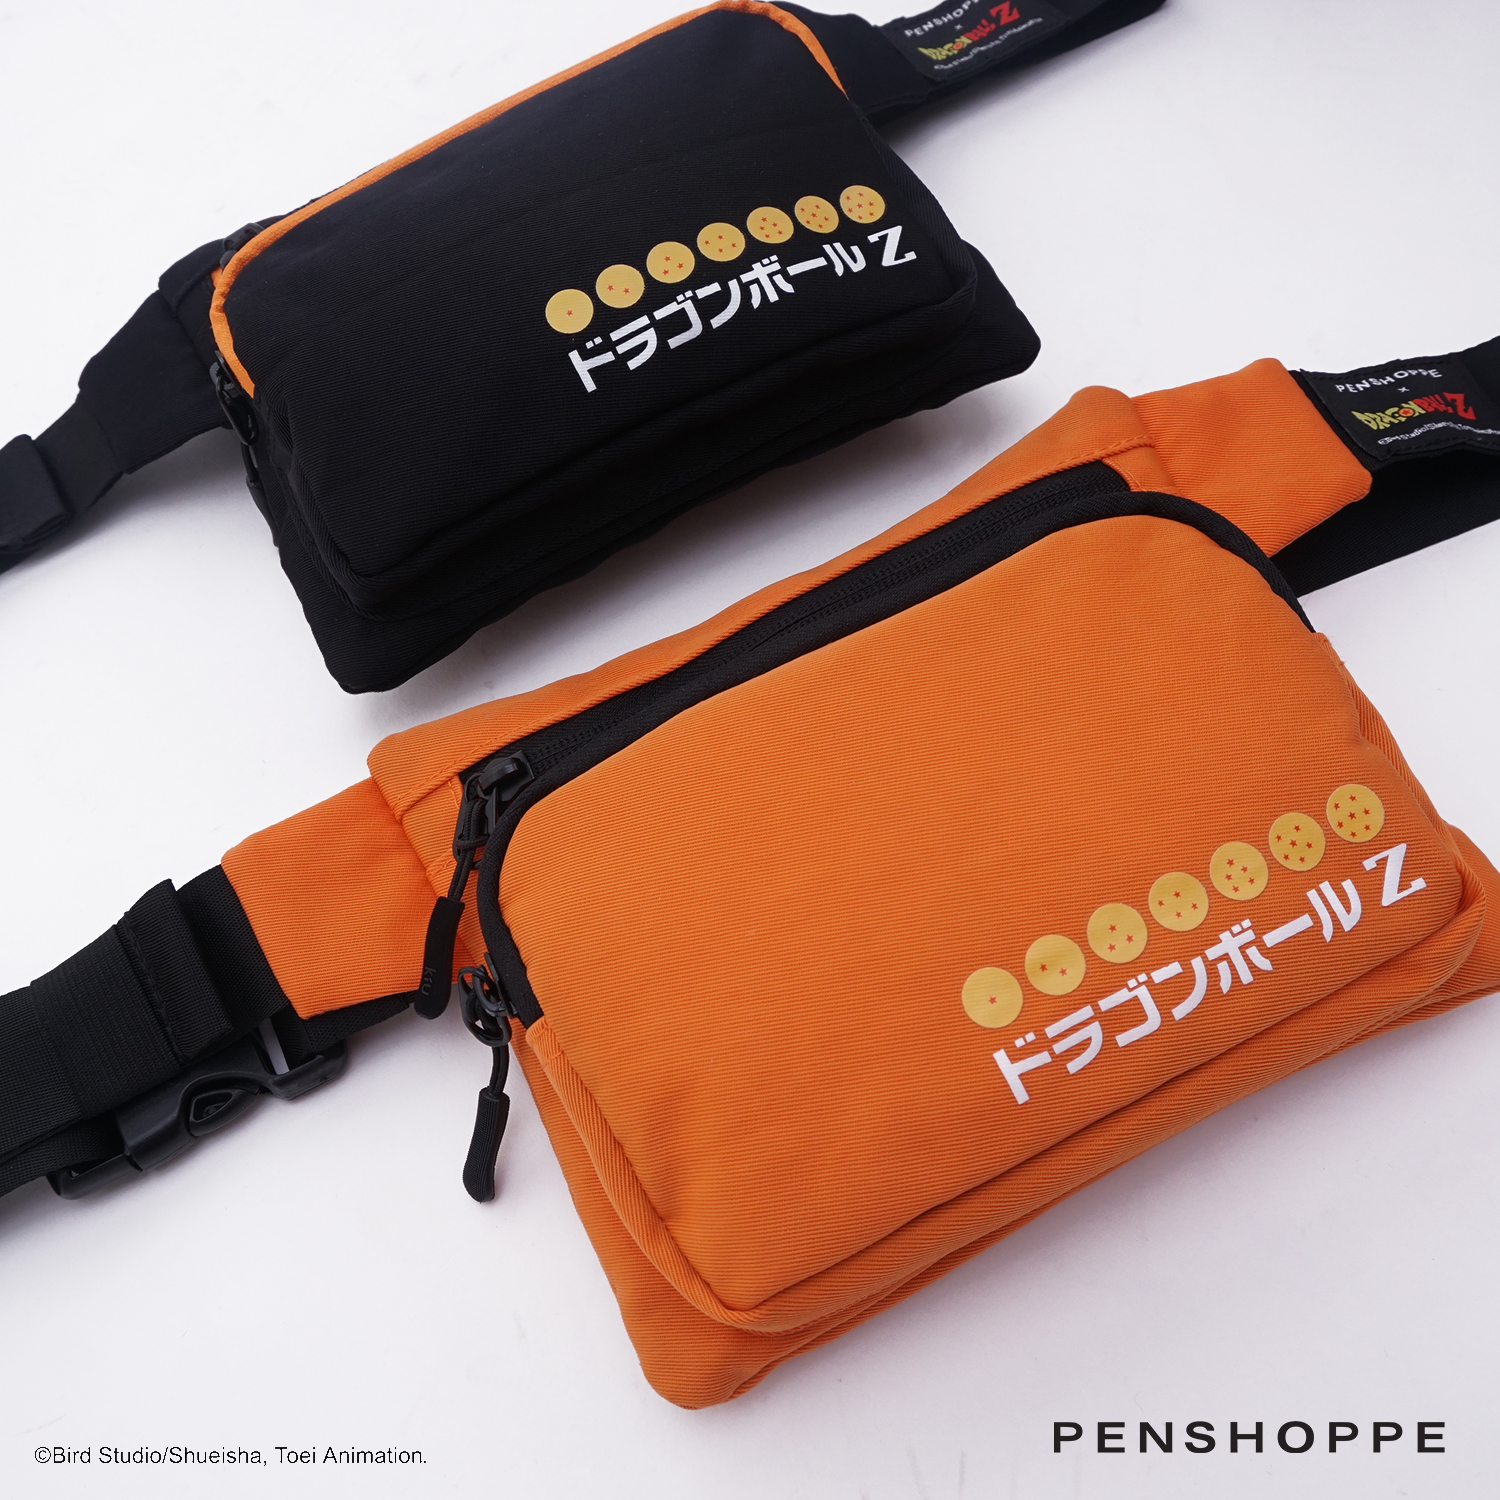 Penshoppe Drops Limited Edition Dragonball Z Collection - Clavel Magazine